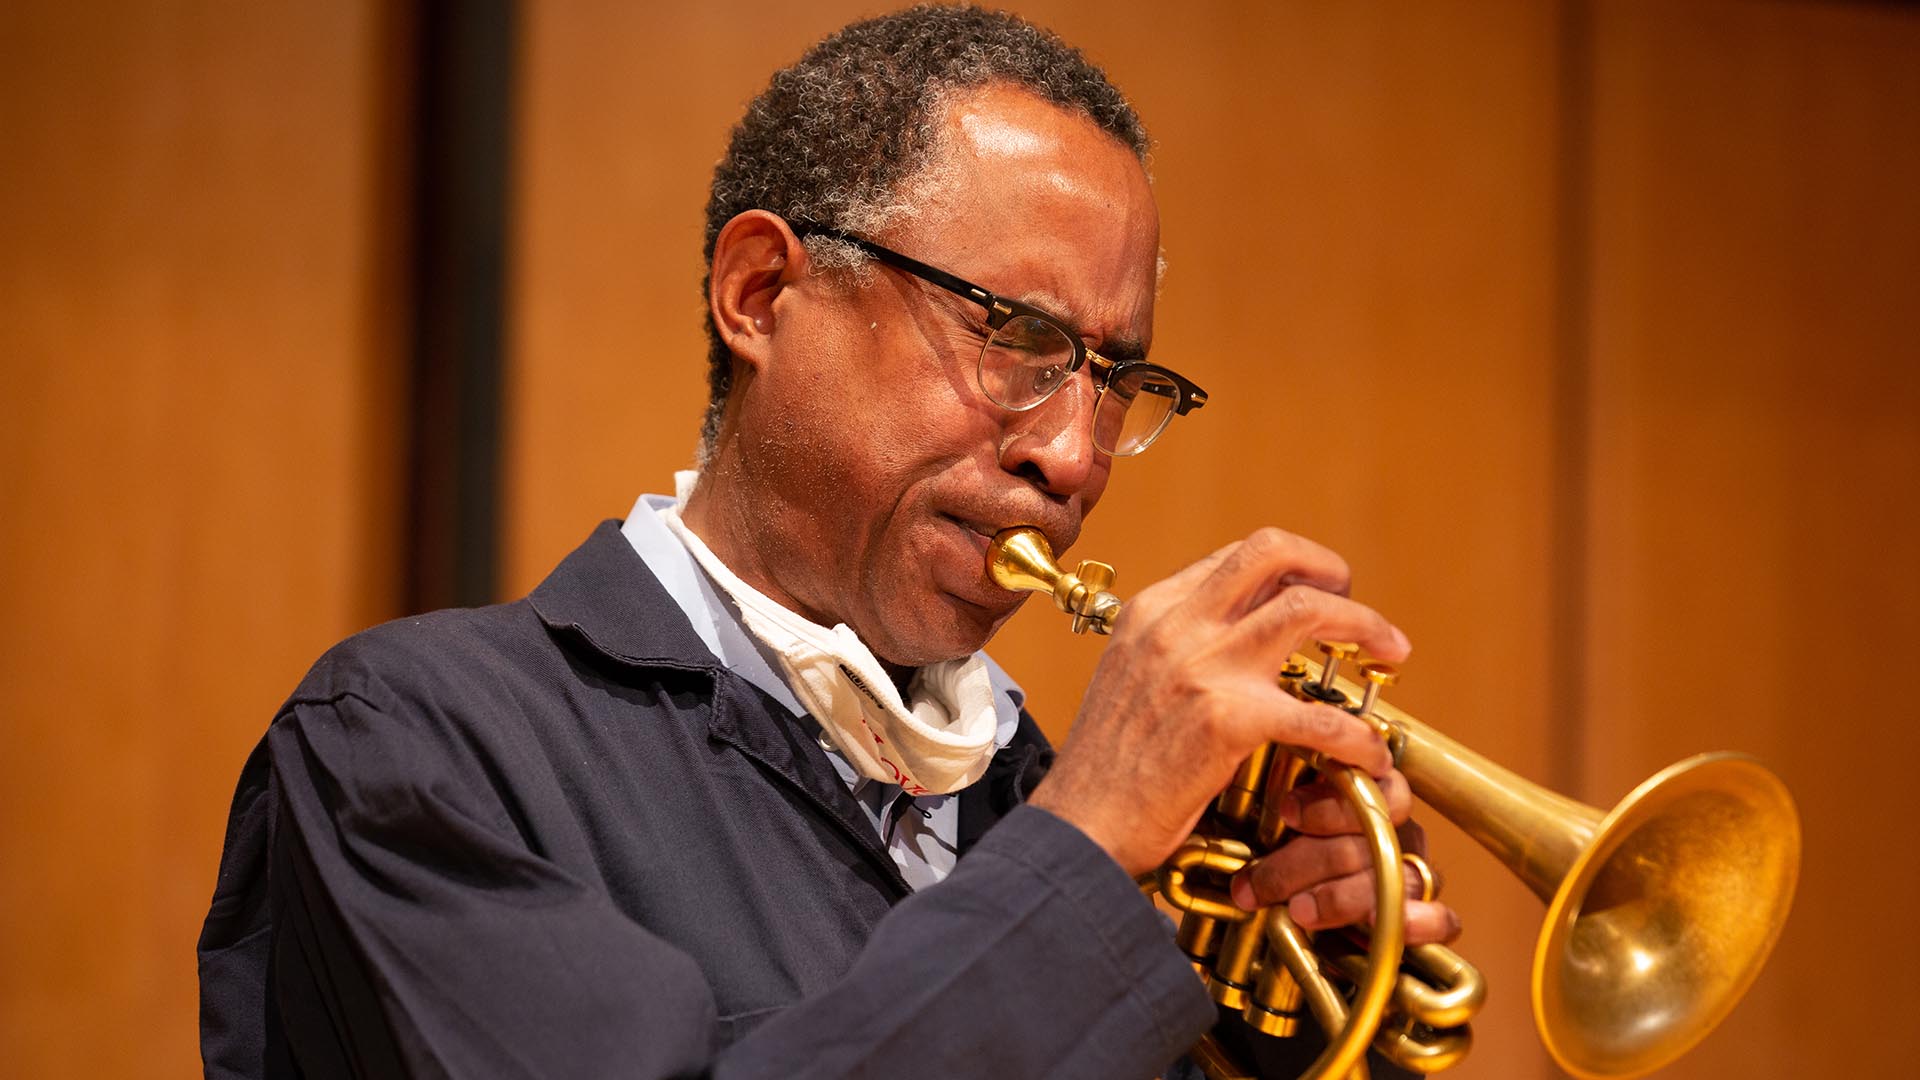 Cornetist, composer and former MSU Denver Director of Jazz Studies Ron Miles plays in the King Center on Sept. 15, 2020.